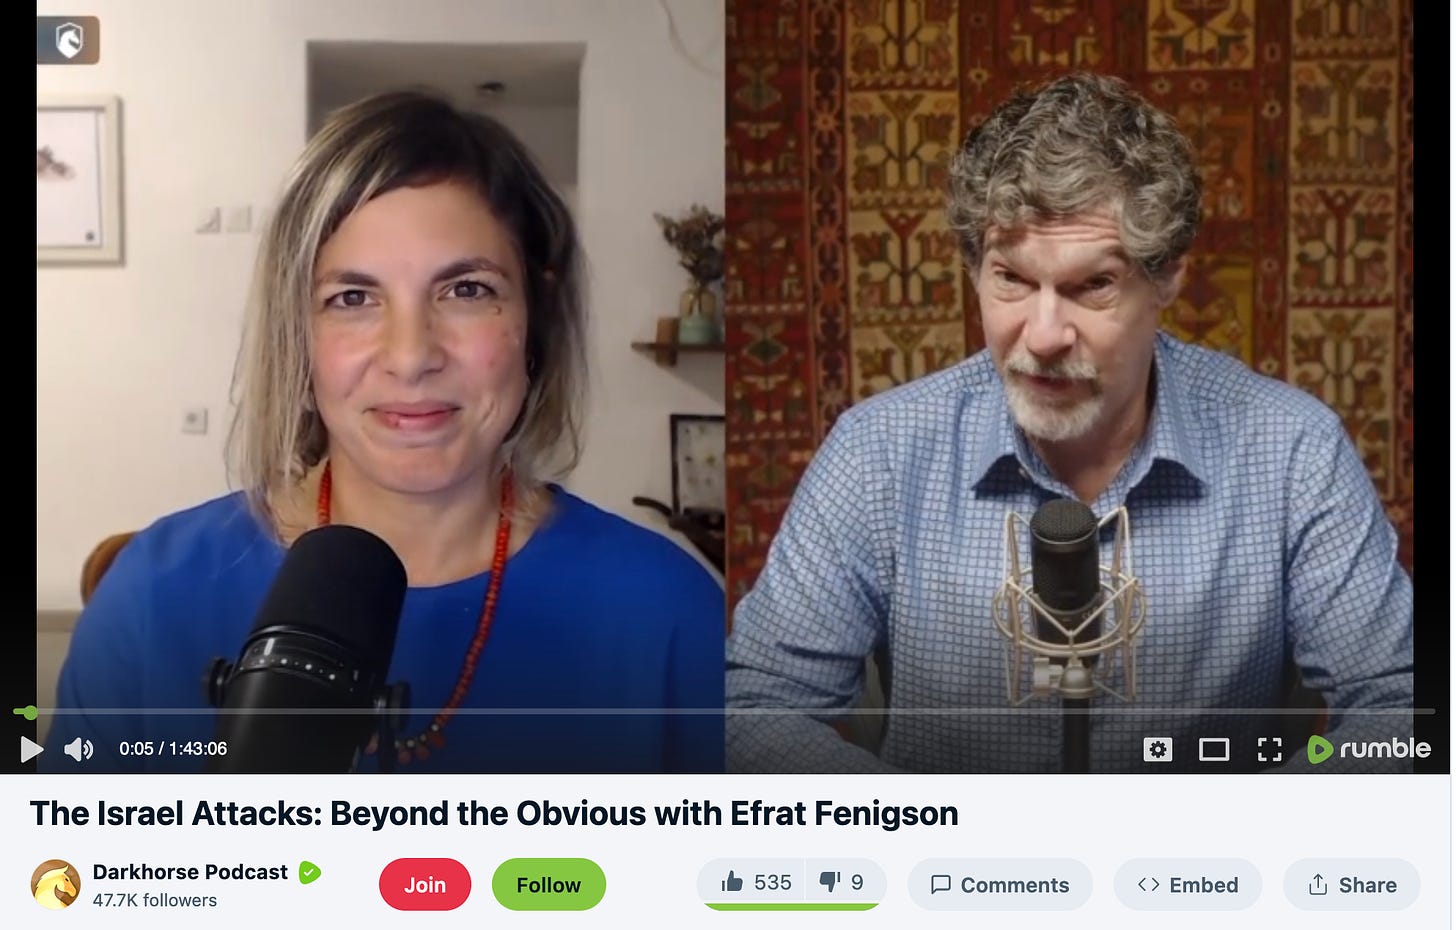 https://rumble.com/v3oewxb-the-israel-attacks-beyond-the-obvious-with-efrat-fenigson.html